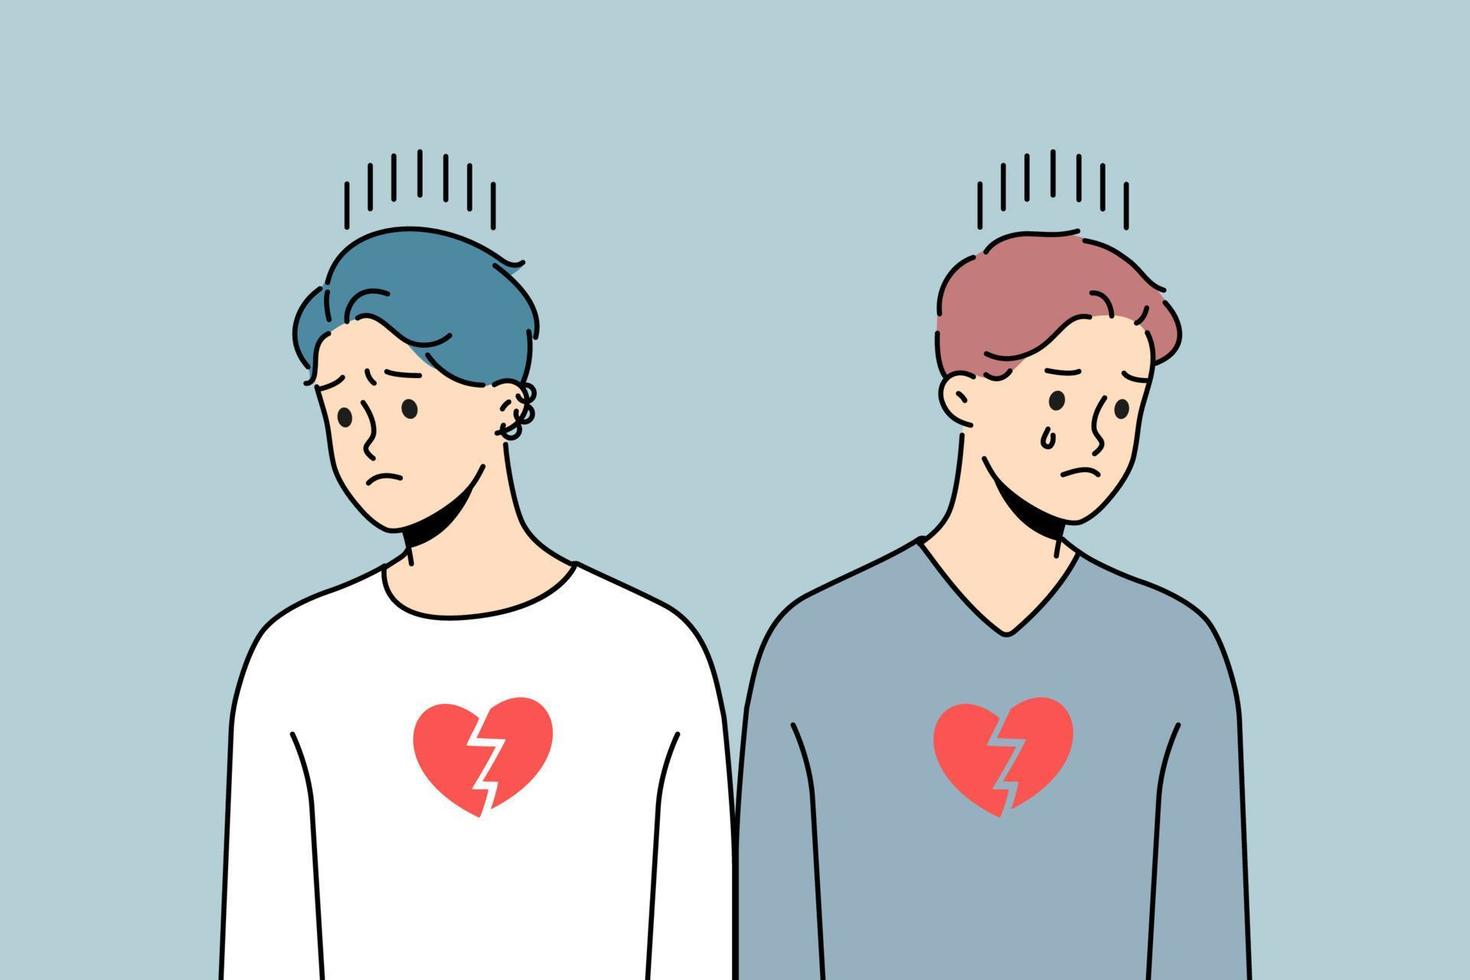 Unhappy homosexual couple suffer from broken hearts. Upset men struggle with relationships breakup or separation. Homosexuality concept. Vector illustration.